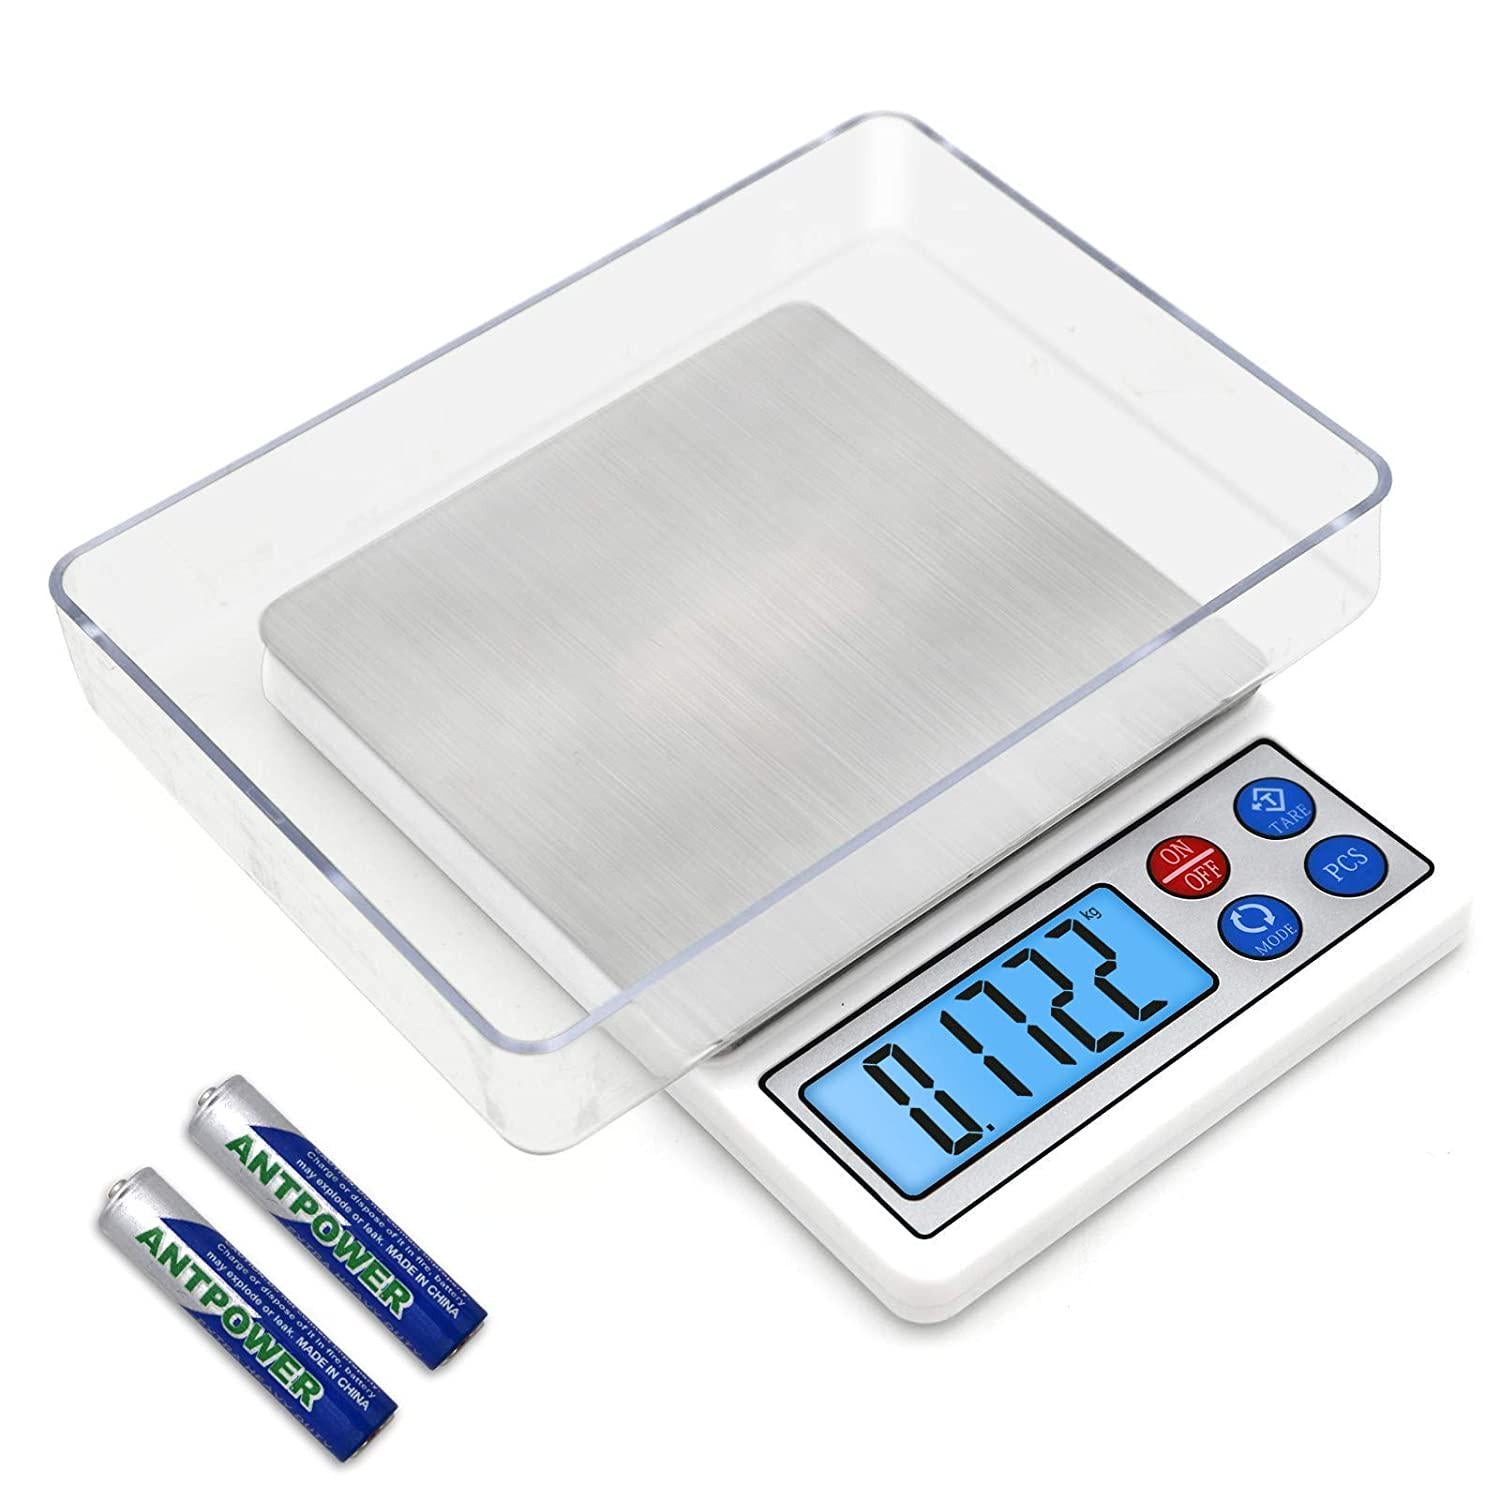 FEBHBRQ, Febhbrq Digital Kitchen Scale 3000g x 0.1g /105.8 oz/6.6 lb Gram Scale High-Precision Pocket Mini Pro Scale with Back-lit LCD Display and Tray for Food and Jewelry (Battery Included)